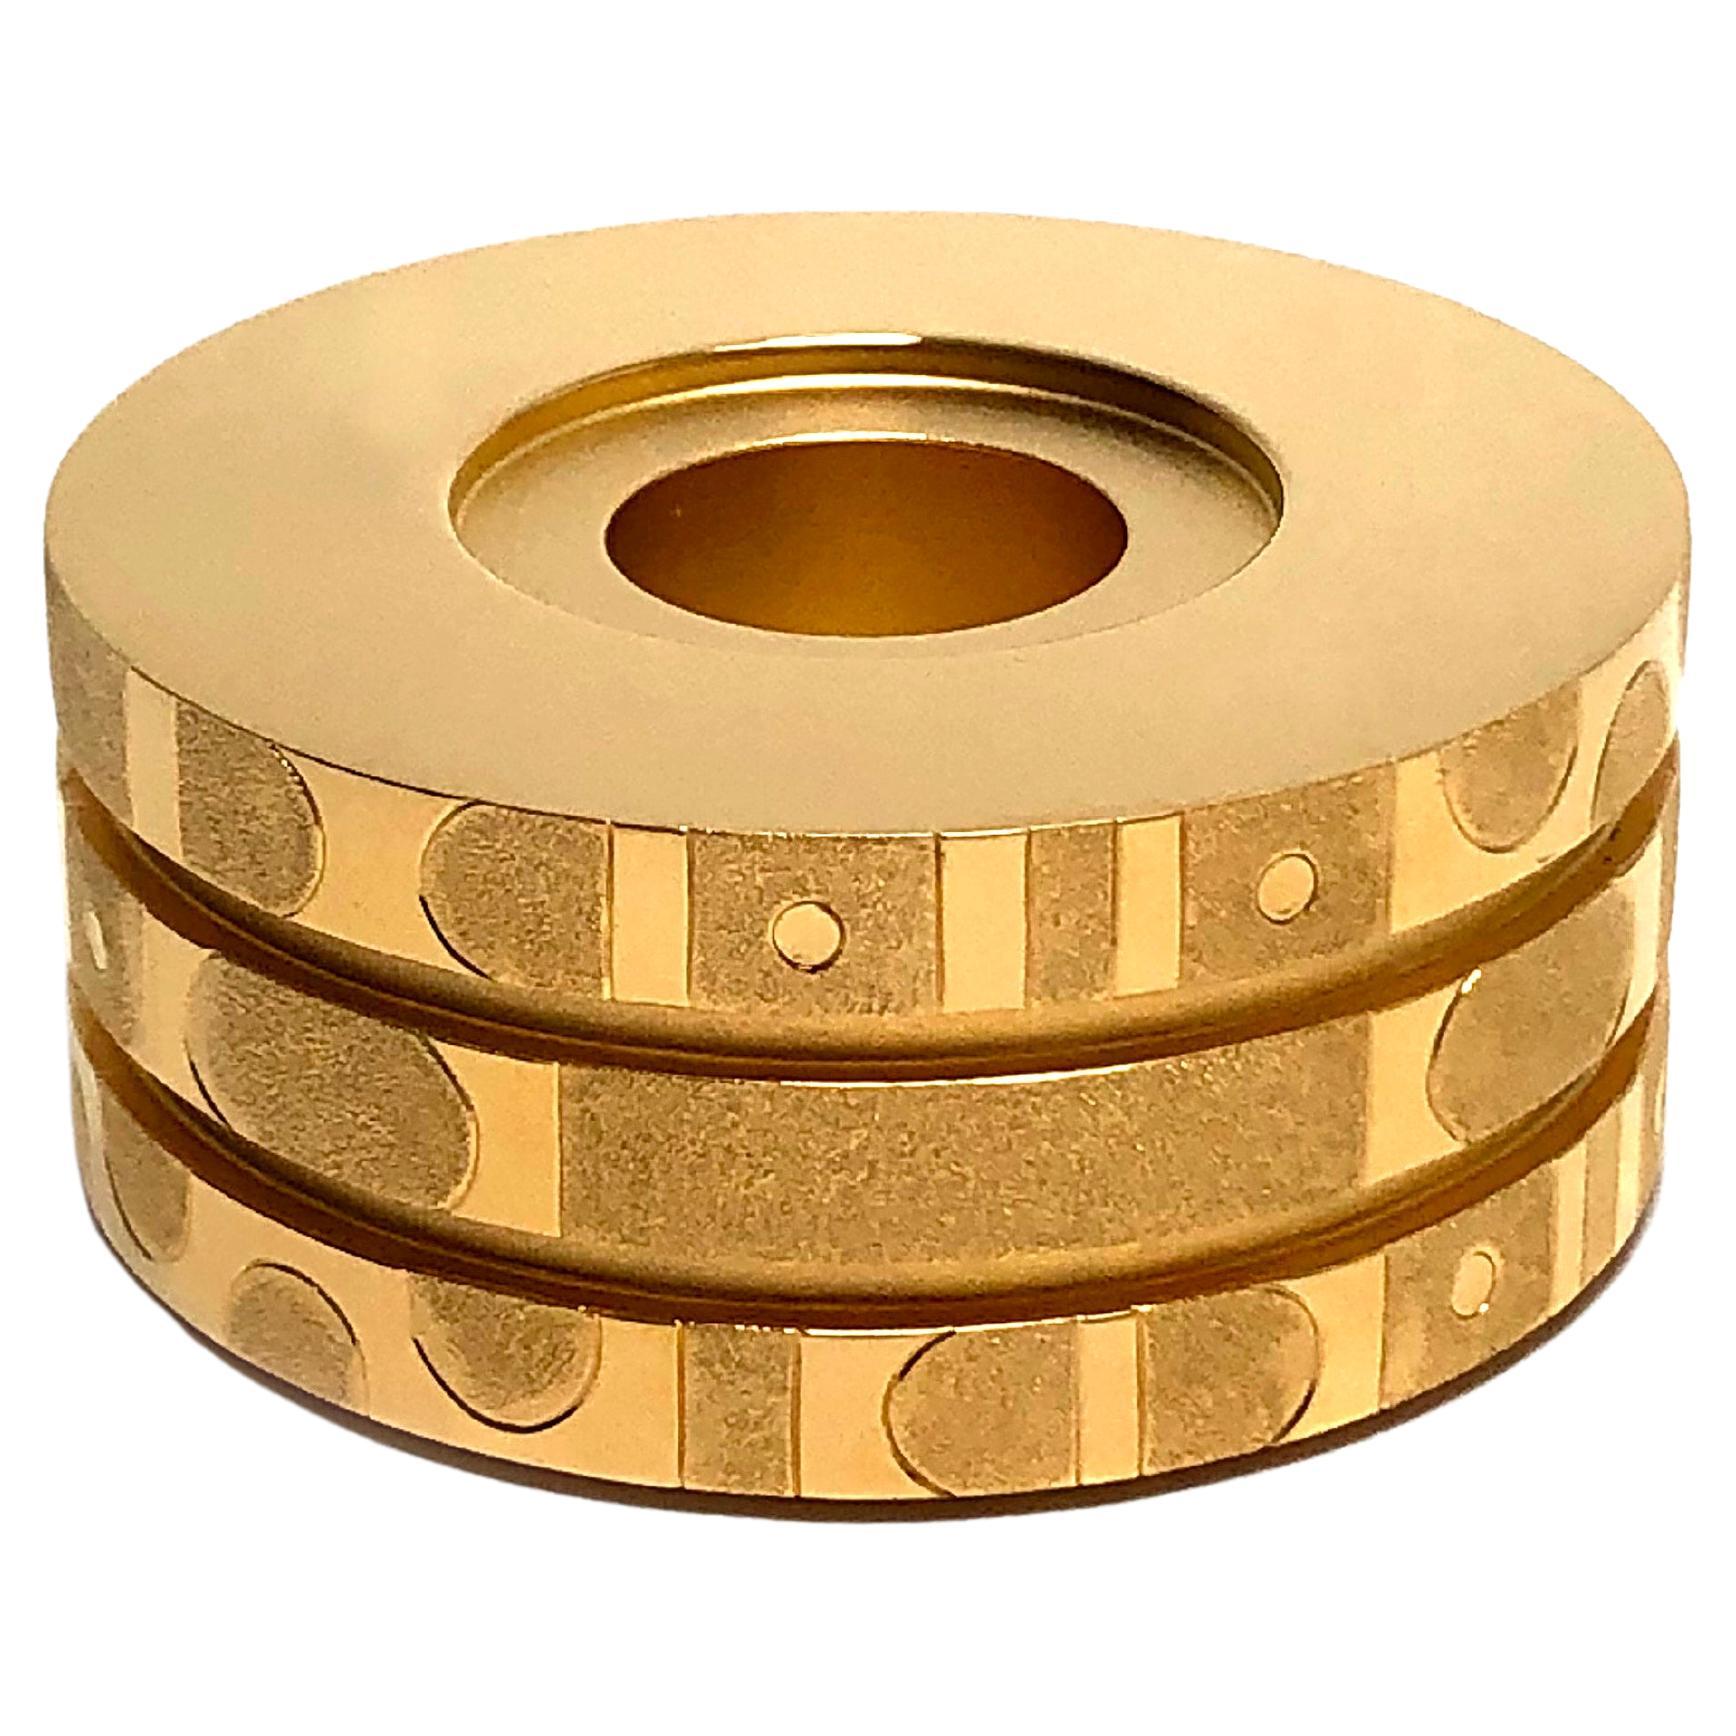 Gold-plated Candleholder Born to Be a Light, "Graphic Cylinder" from TOTEM N°2 For Sale